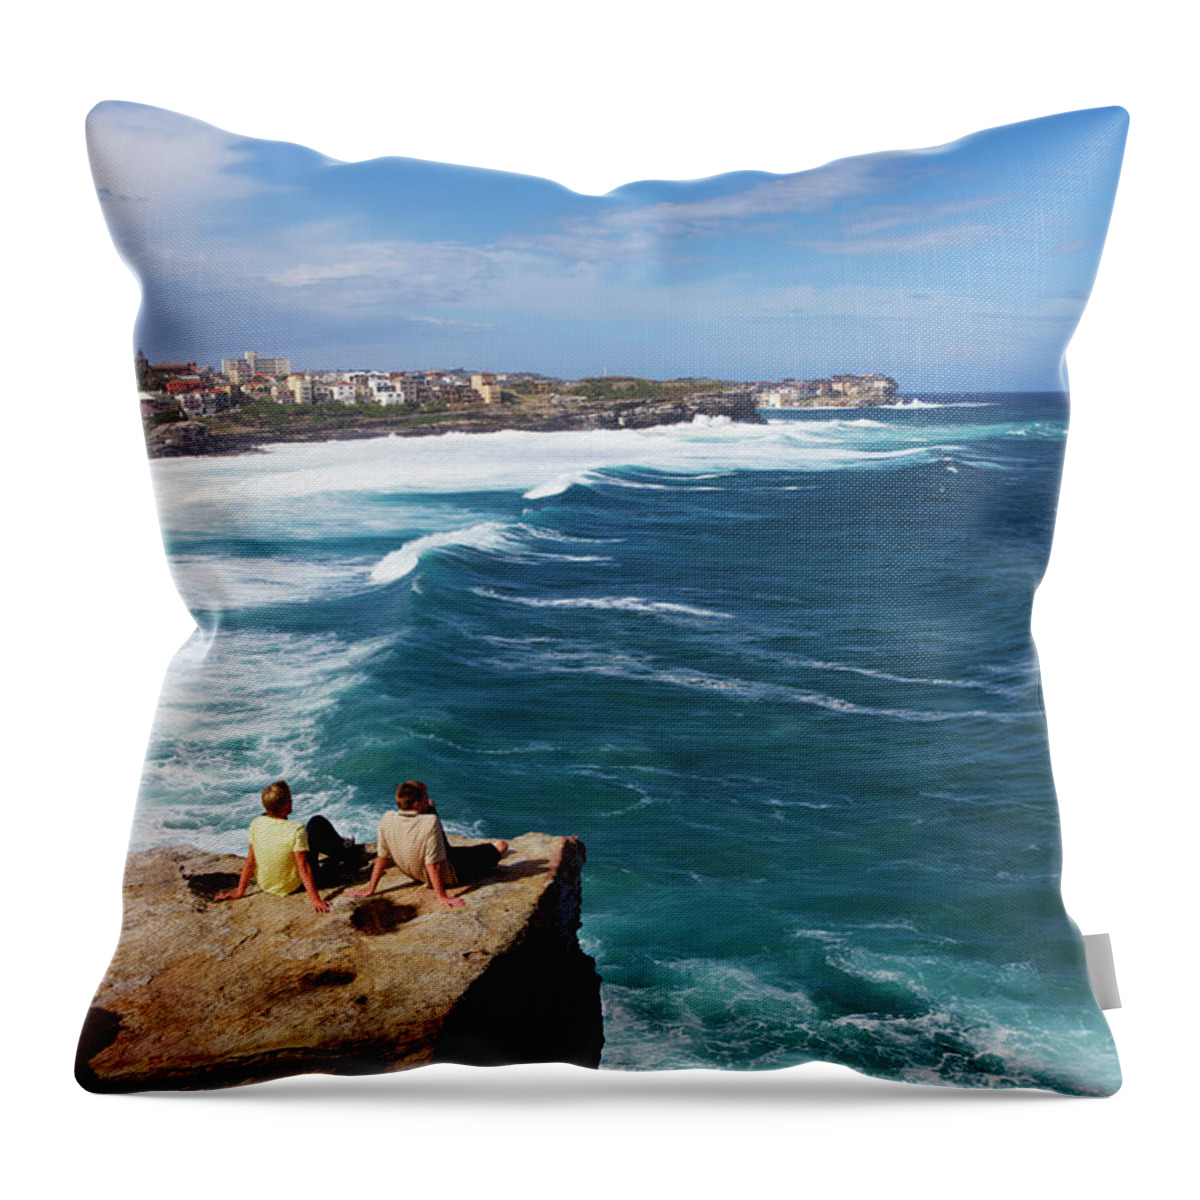 Scenics Throw Pillow featuring the photograph Men On Sea Rocks At Bronte Beach by Oliver Strewe